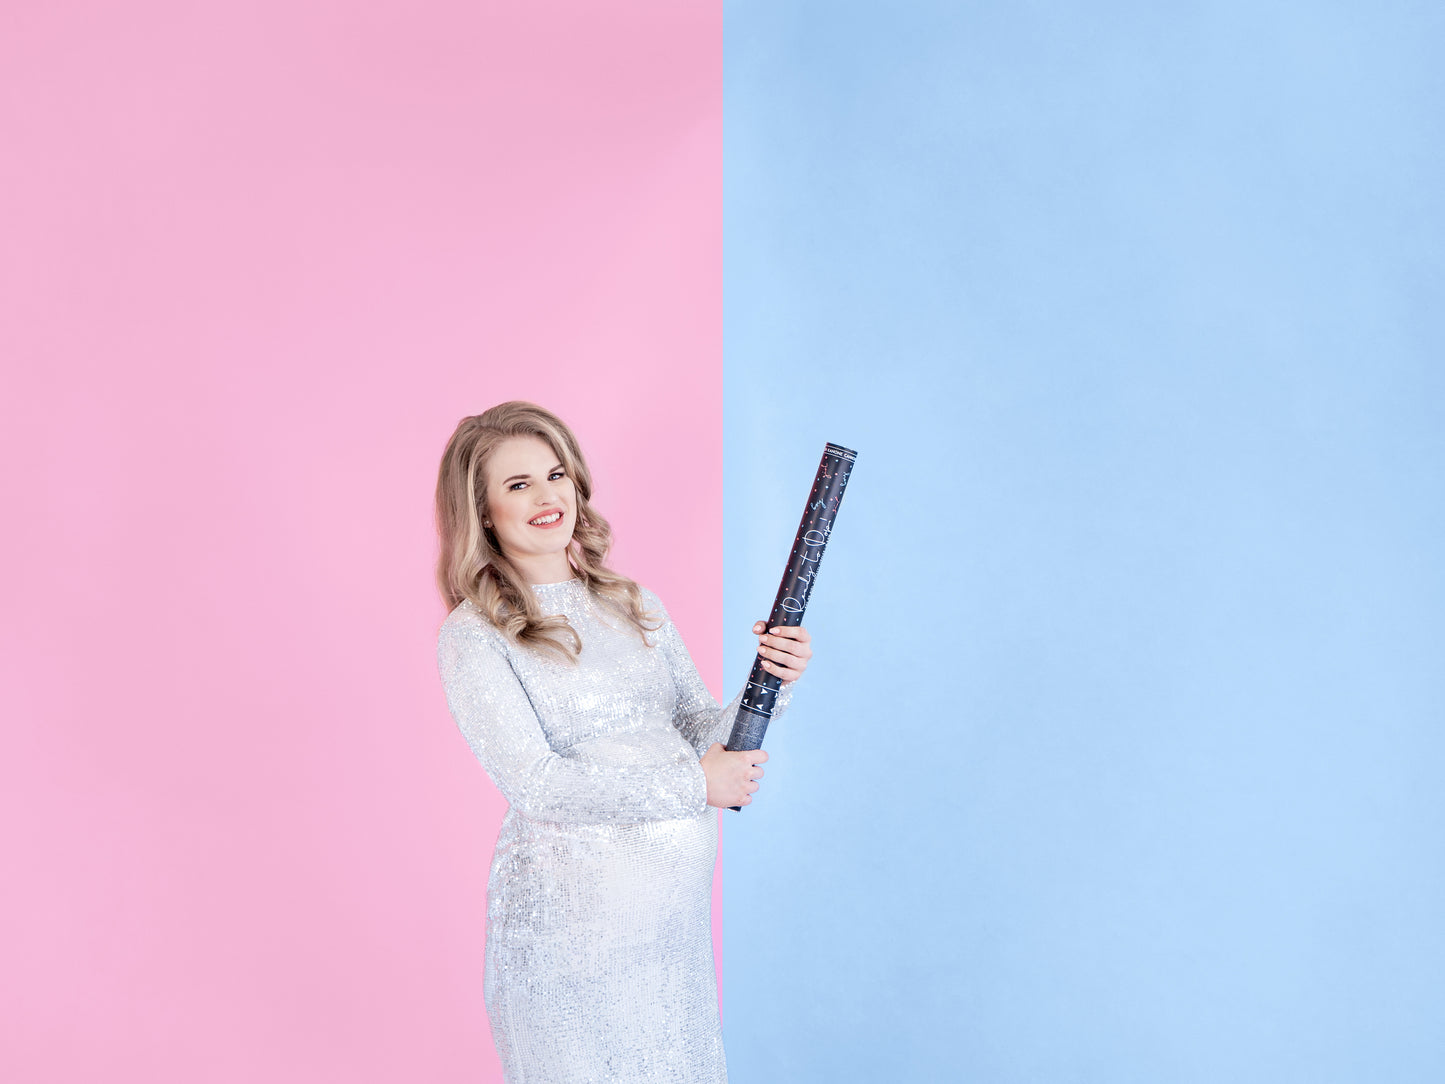 Gender Reveal Giant Confetti Cannon - PINK - Uk Baby Shower Co ltd